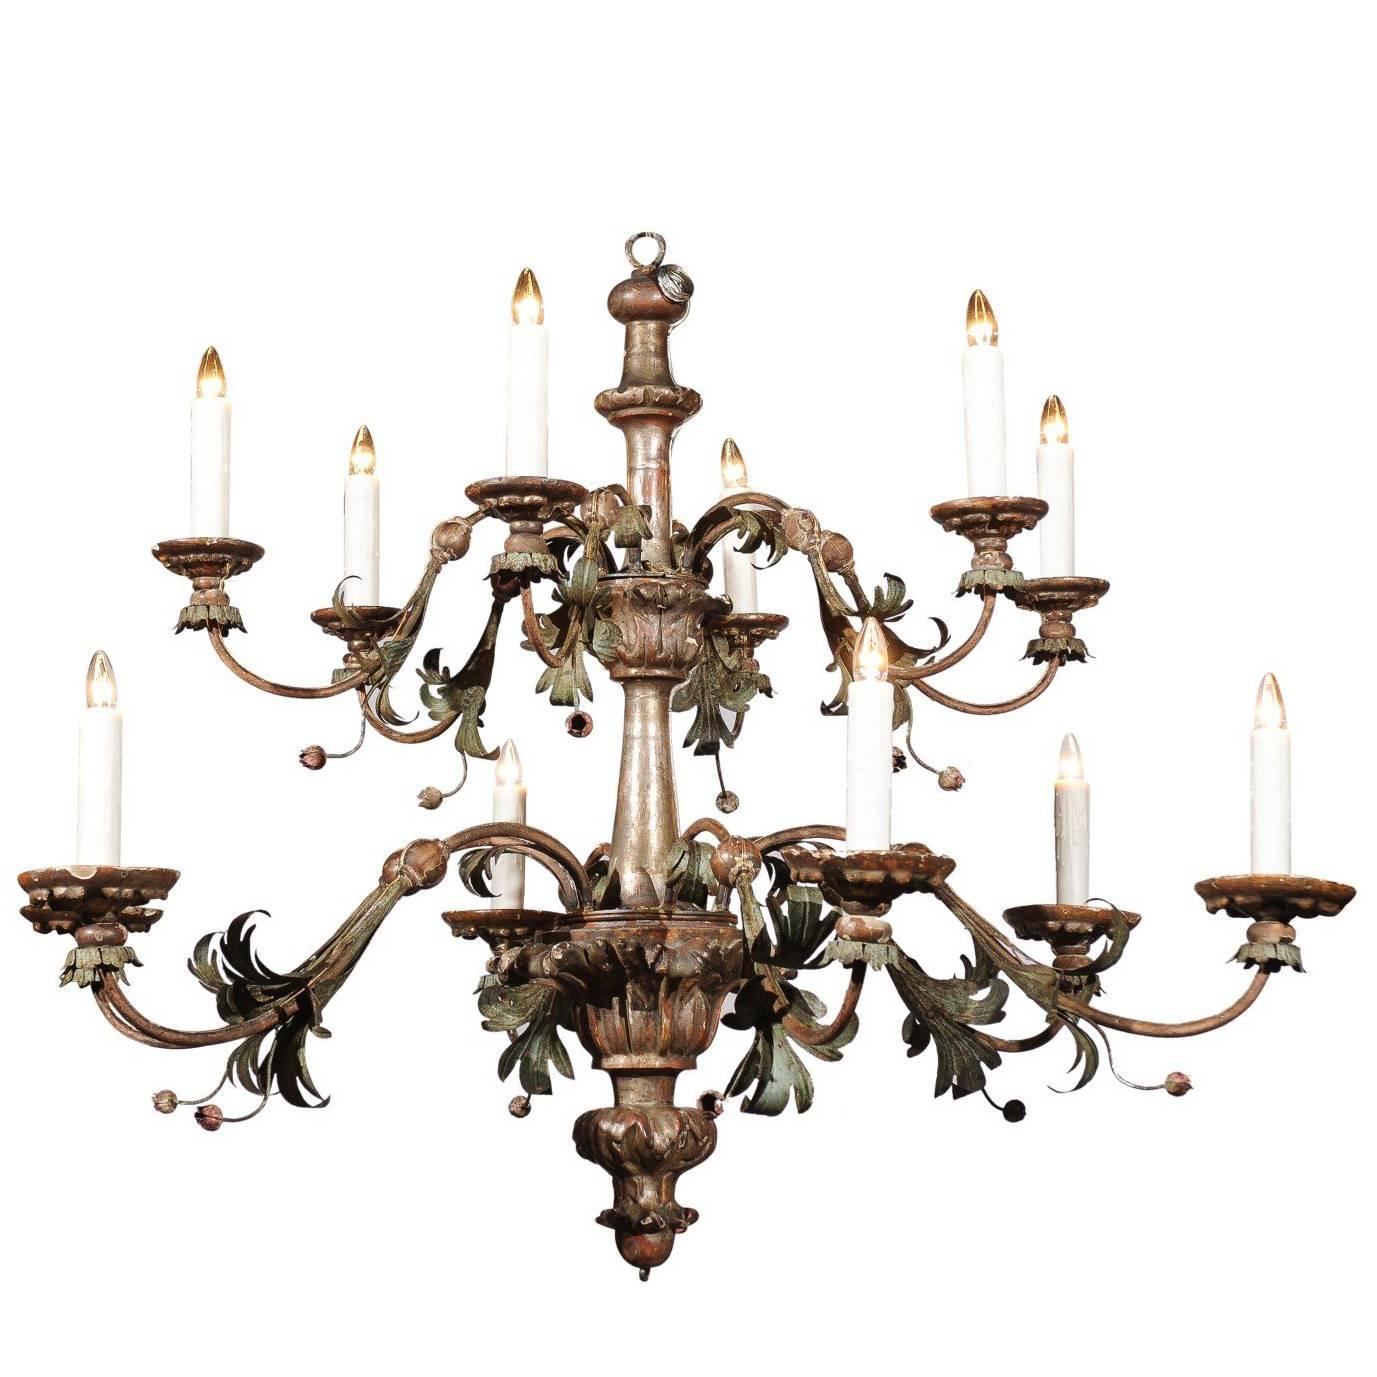 Italian Silver Gilt and Painted Tole 12-Light Chandelier from the Tuscany Region